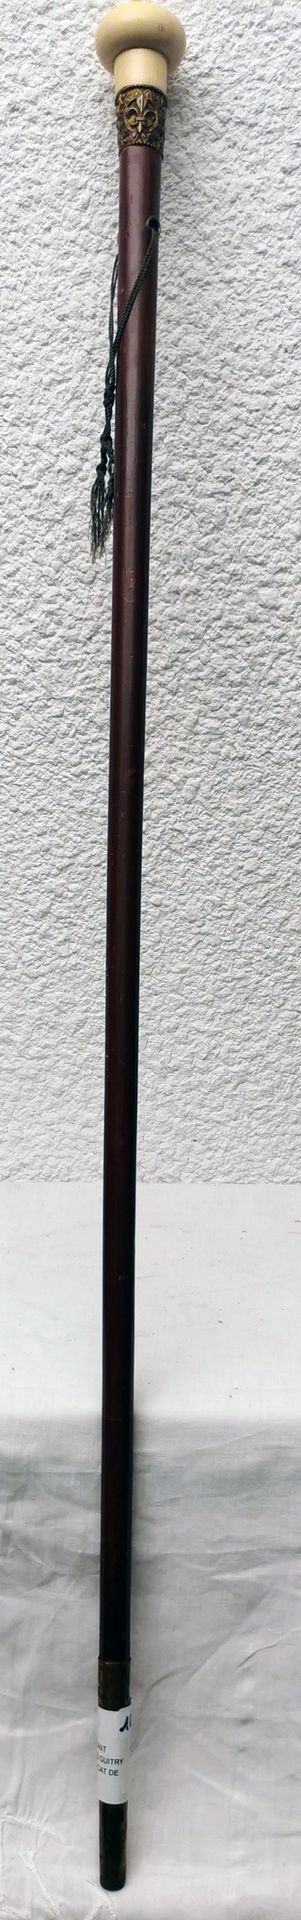 Sacha GUITRY CANE HAVING BELONGED TO S.GUITRY WITH CERTIFICATE OF SALE